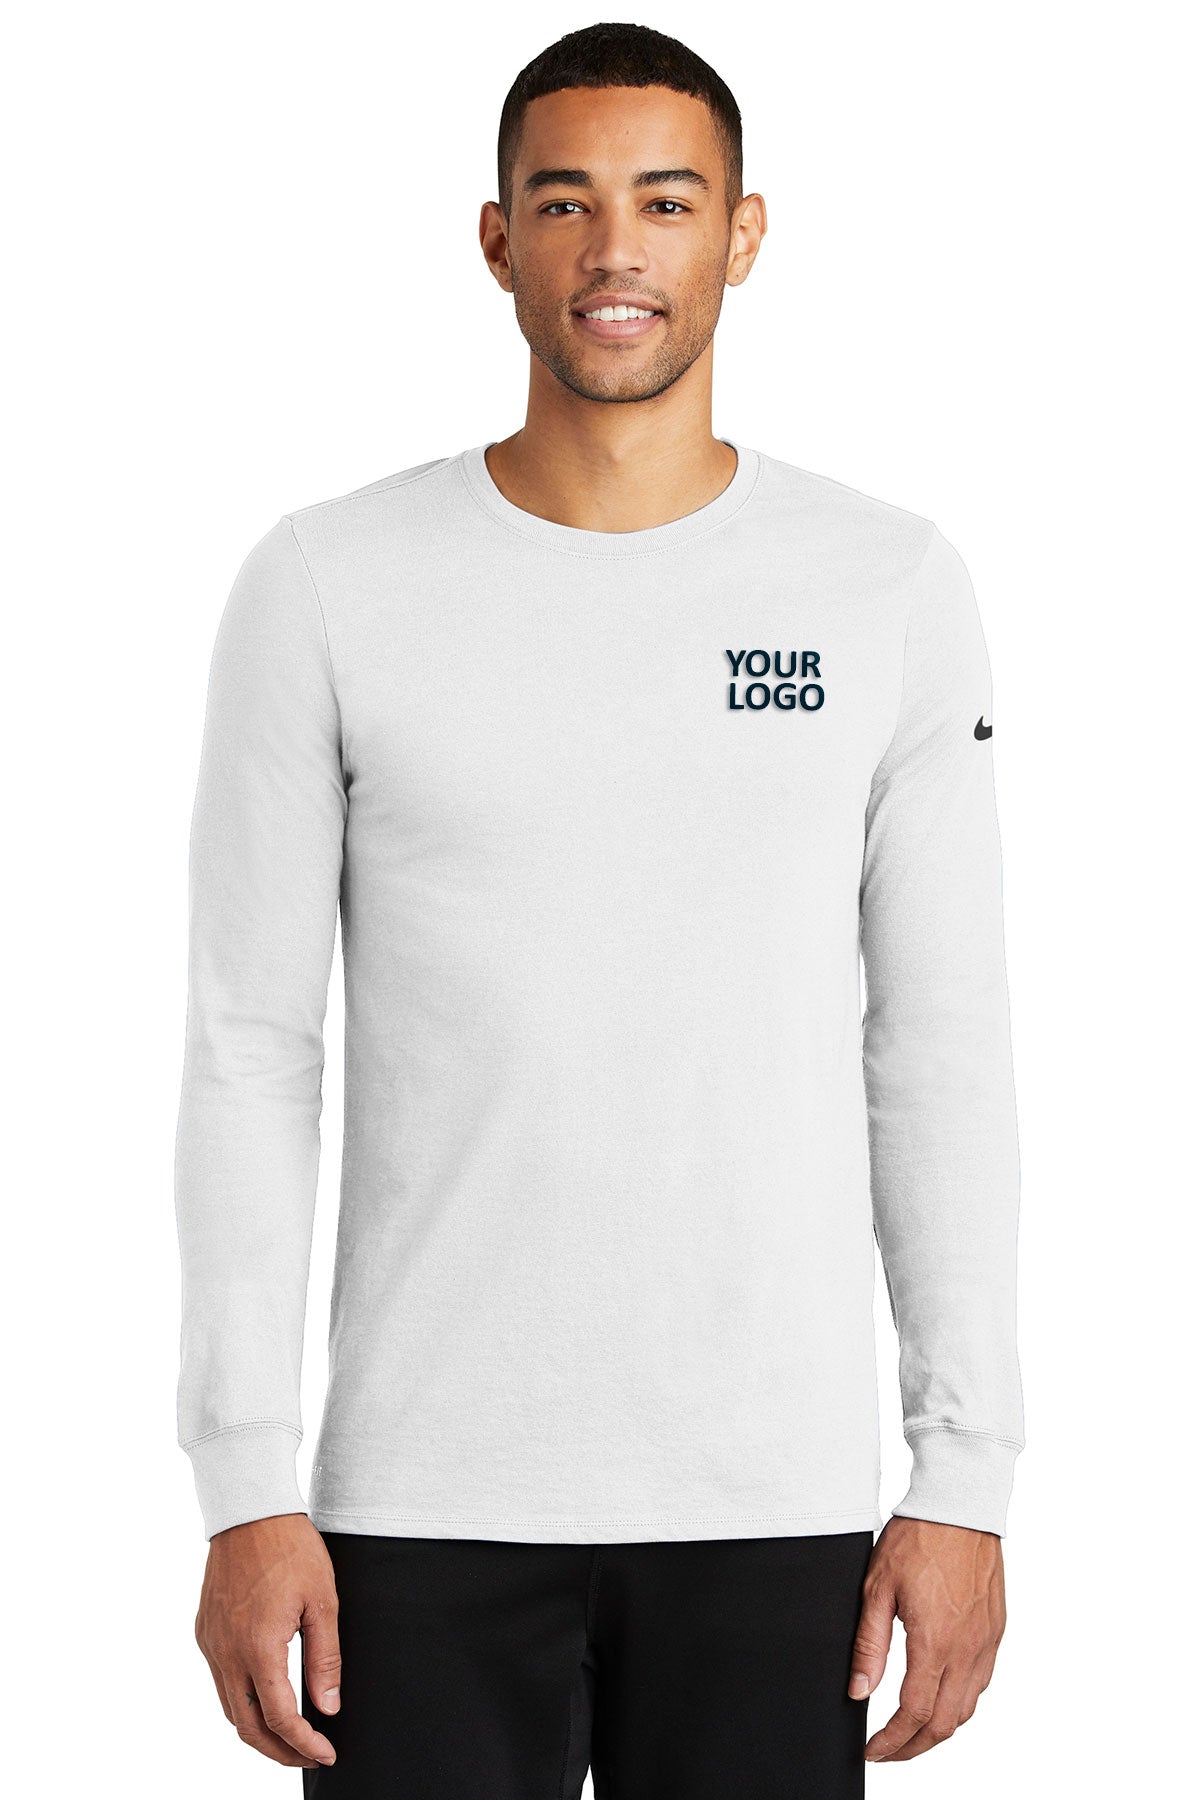 Nike Dri-FIT Long Sleeve Tee, White [Launch by Lead Apparel]